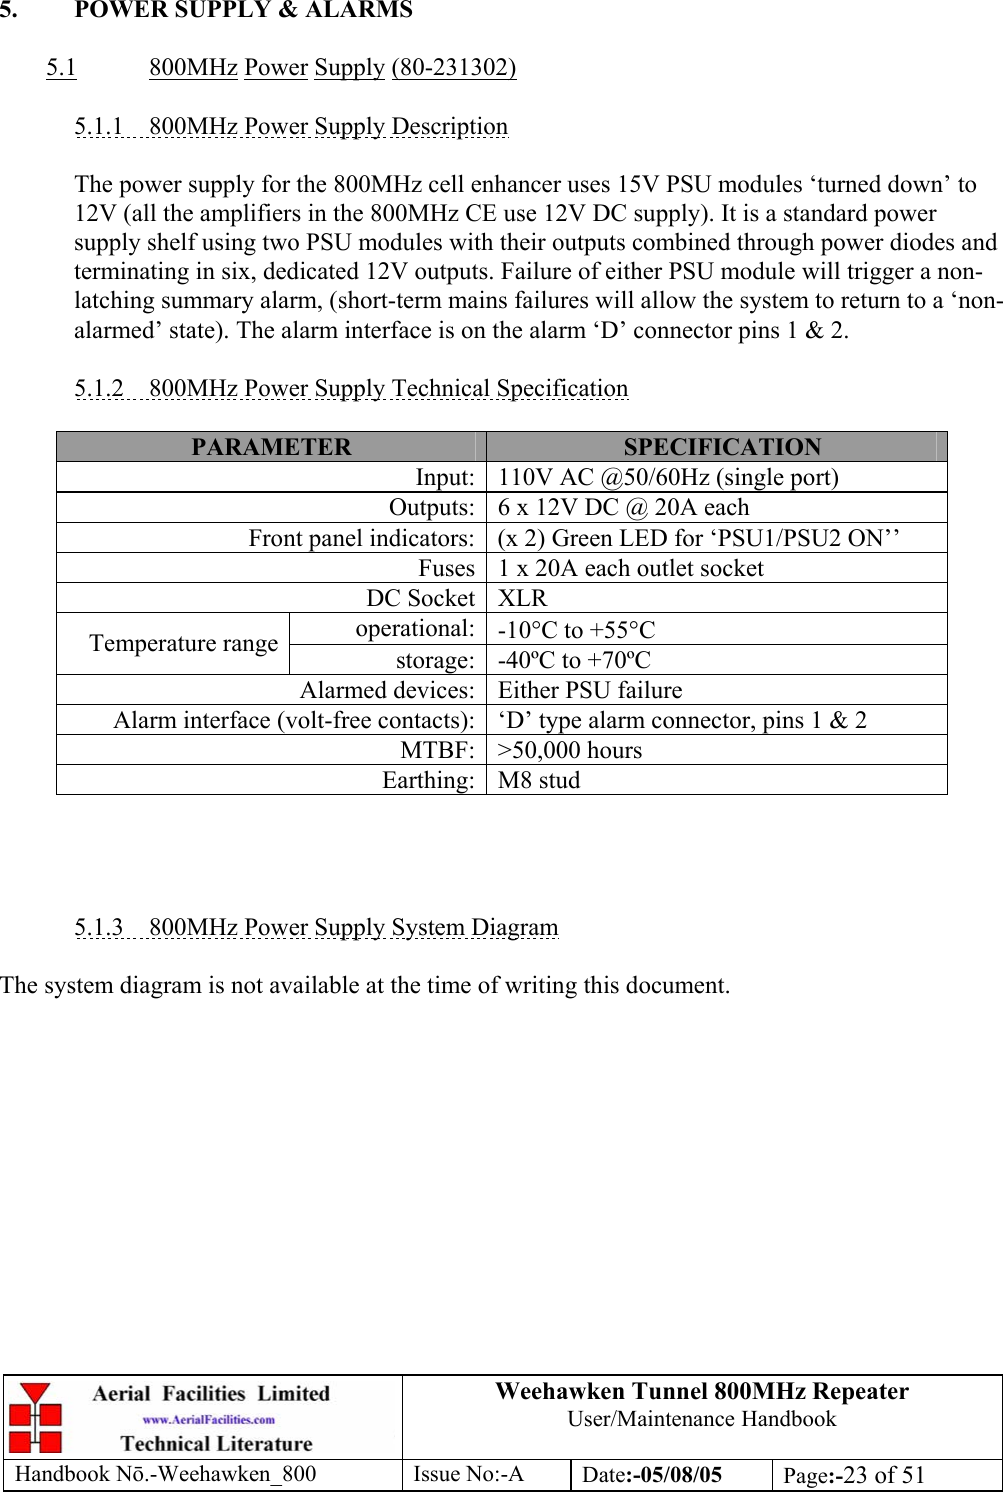 Weehawken Tunnel 800MHz Repeater User/Maintenance Handbook Handbook N.-Weehawken_800 Issue No:-A Date:-05/08/05  Page:-23 of 51   5.  POWER SUPPLY &amp; ALARMS  5.1 800MHz Power Supply (80-231302)  5.1.1  800MHz Power Supply Description  The power supply for the 800MHz cell enhancer uses 15V PSU modules ‘turned down’ to 12V (all the amplifiers in the 800MHz CE use 12V DC supply). It is a standard power supply shelf using two PSU modules with their outputs combined through power diodes and terminating in six, dedicated 12V outputs. Failure of either PSU module will trigger a non-latching summary alarm, (short-term mains failures will allow the system to return to a ‘non-alarmed’ state). The alarm interface is on the alarm ‘D’ connector pins 1 &amp; 2.  5.1.2  800MHz Power Supply Technical Specification  PARAMETER  SPECIFICATION Input: 110V AC @50/60Hz (single port) Outputs: 6 x 12V DC @ 20A each Front panel indicators: (x 2) Green LED for ‘PSU1/PSU2 ON’’ Fuses 1 x 20A each outlet socket DC Socket XLR operational: -10°C to +55°C Temperature range  storage: -40ºC to +70ºC Alarmed devices: Either PSU failure Alarm interface (volt-free contacts): ‘D’ type alarm connector, pins 1 &amp; 2 MTBF: &gt;50,000 hours Earthing: M8 stud     5.1.3  800MHz Power Supply System Diagram  The system diagram is not available at the time of writing this document. 